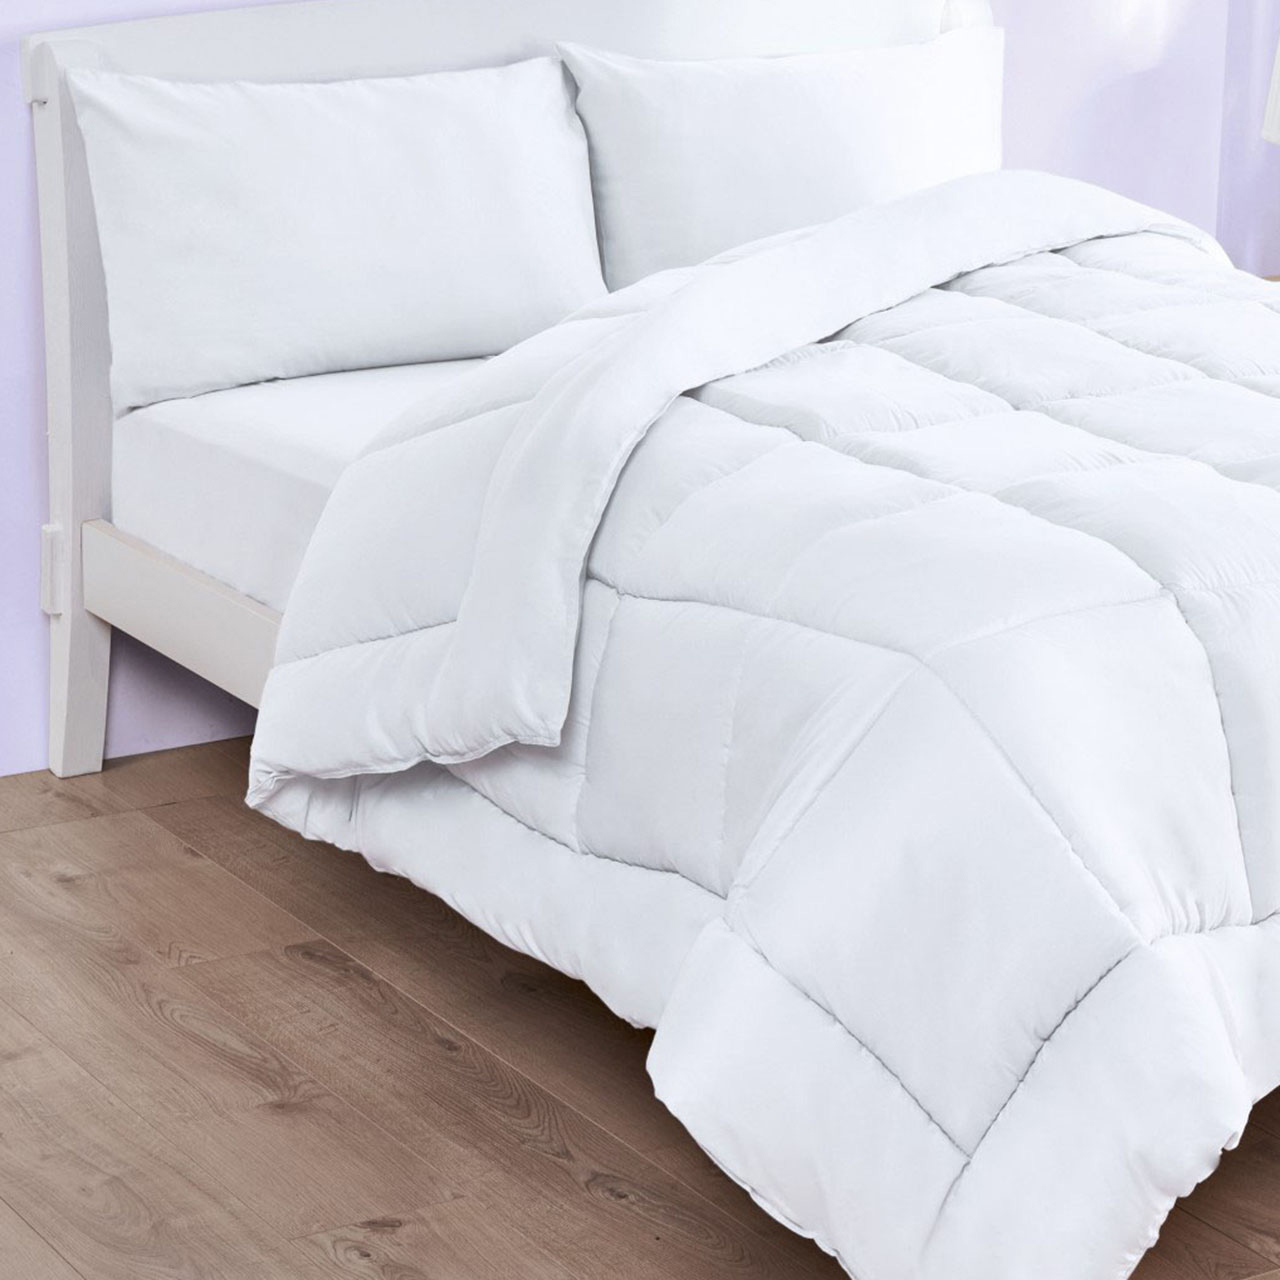 King  All-in-One Coverless Duvet & Bedding Bundle - 10.5 Tog